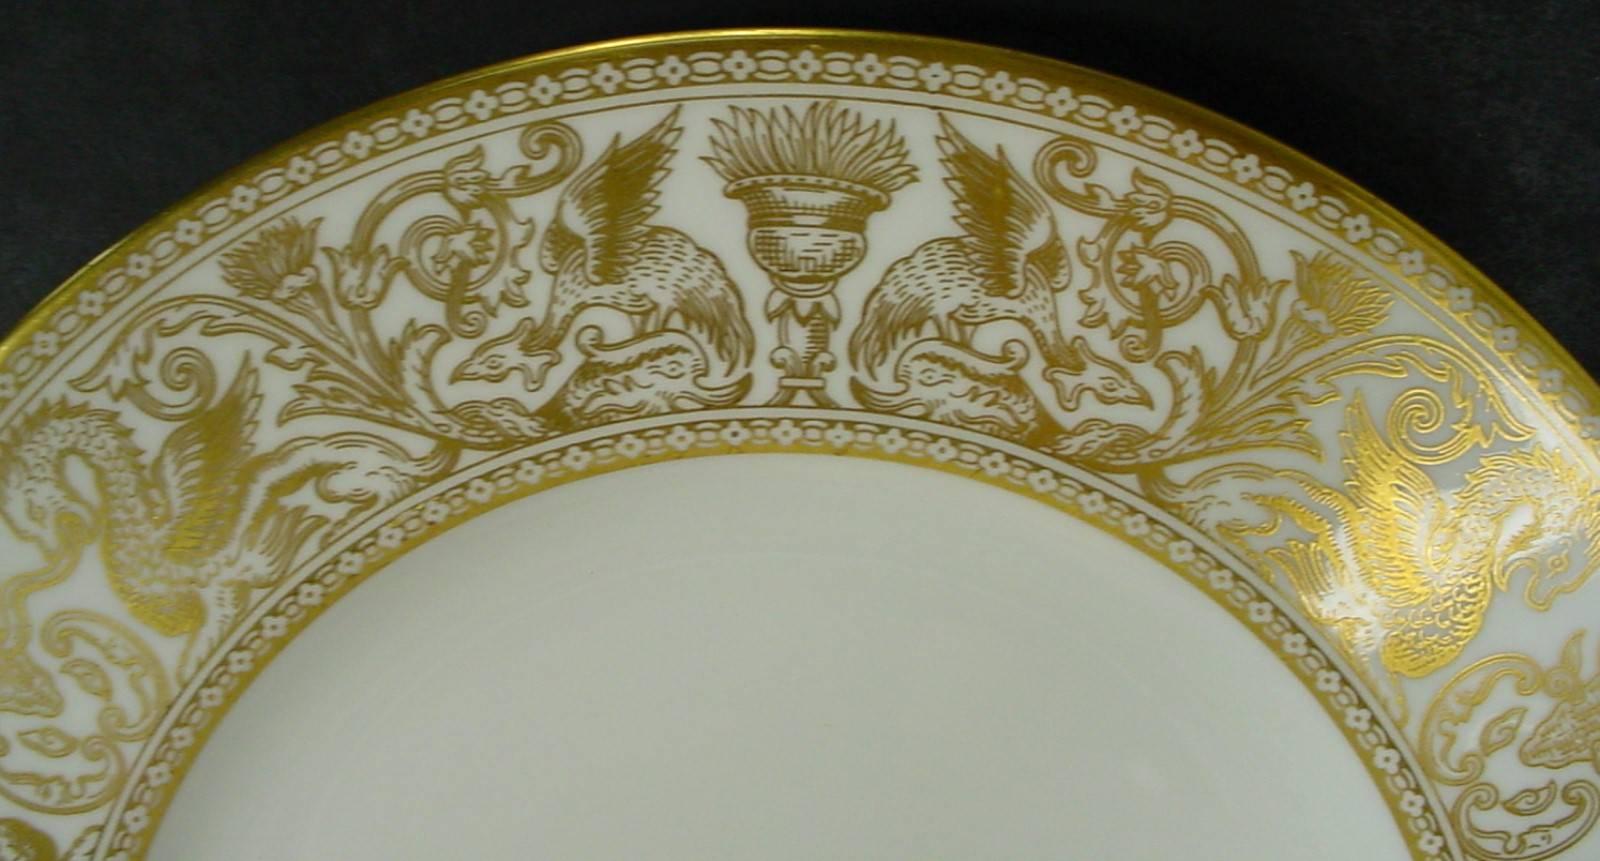 Wedgwood England, China florentine gold W4219 pattern 60-piece set service for twelve (12)

in great condition free from chips, cracks, break, stain, or discoloration and with only a minimum of use.

• Gold outlined dragons. 

• Gold